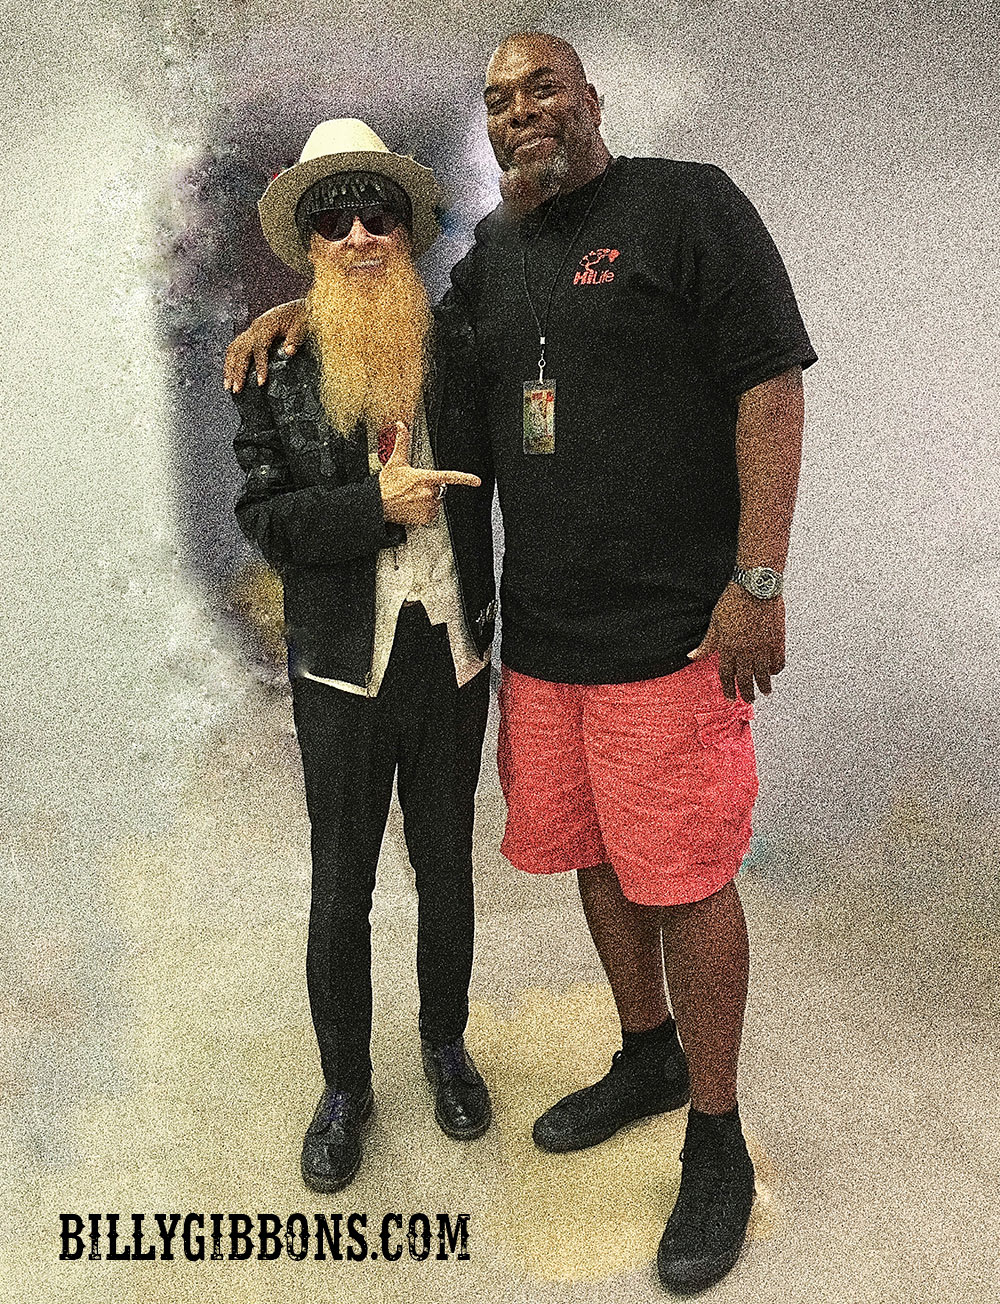 Billy Gibbons and James Otis "Big Cat" Williams - Chicago, IL September 17, 2016